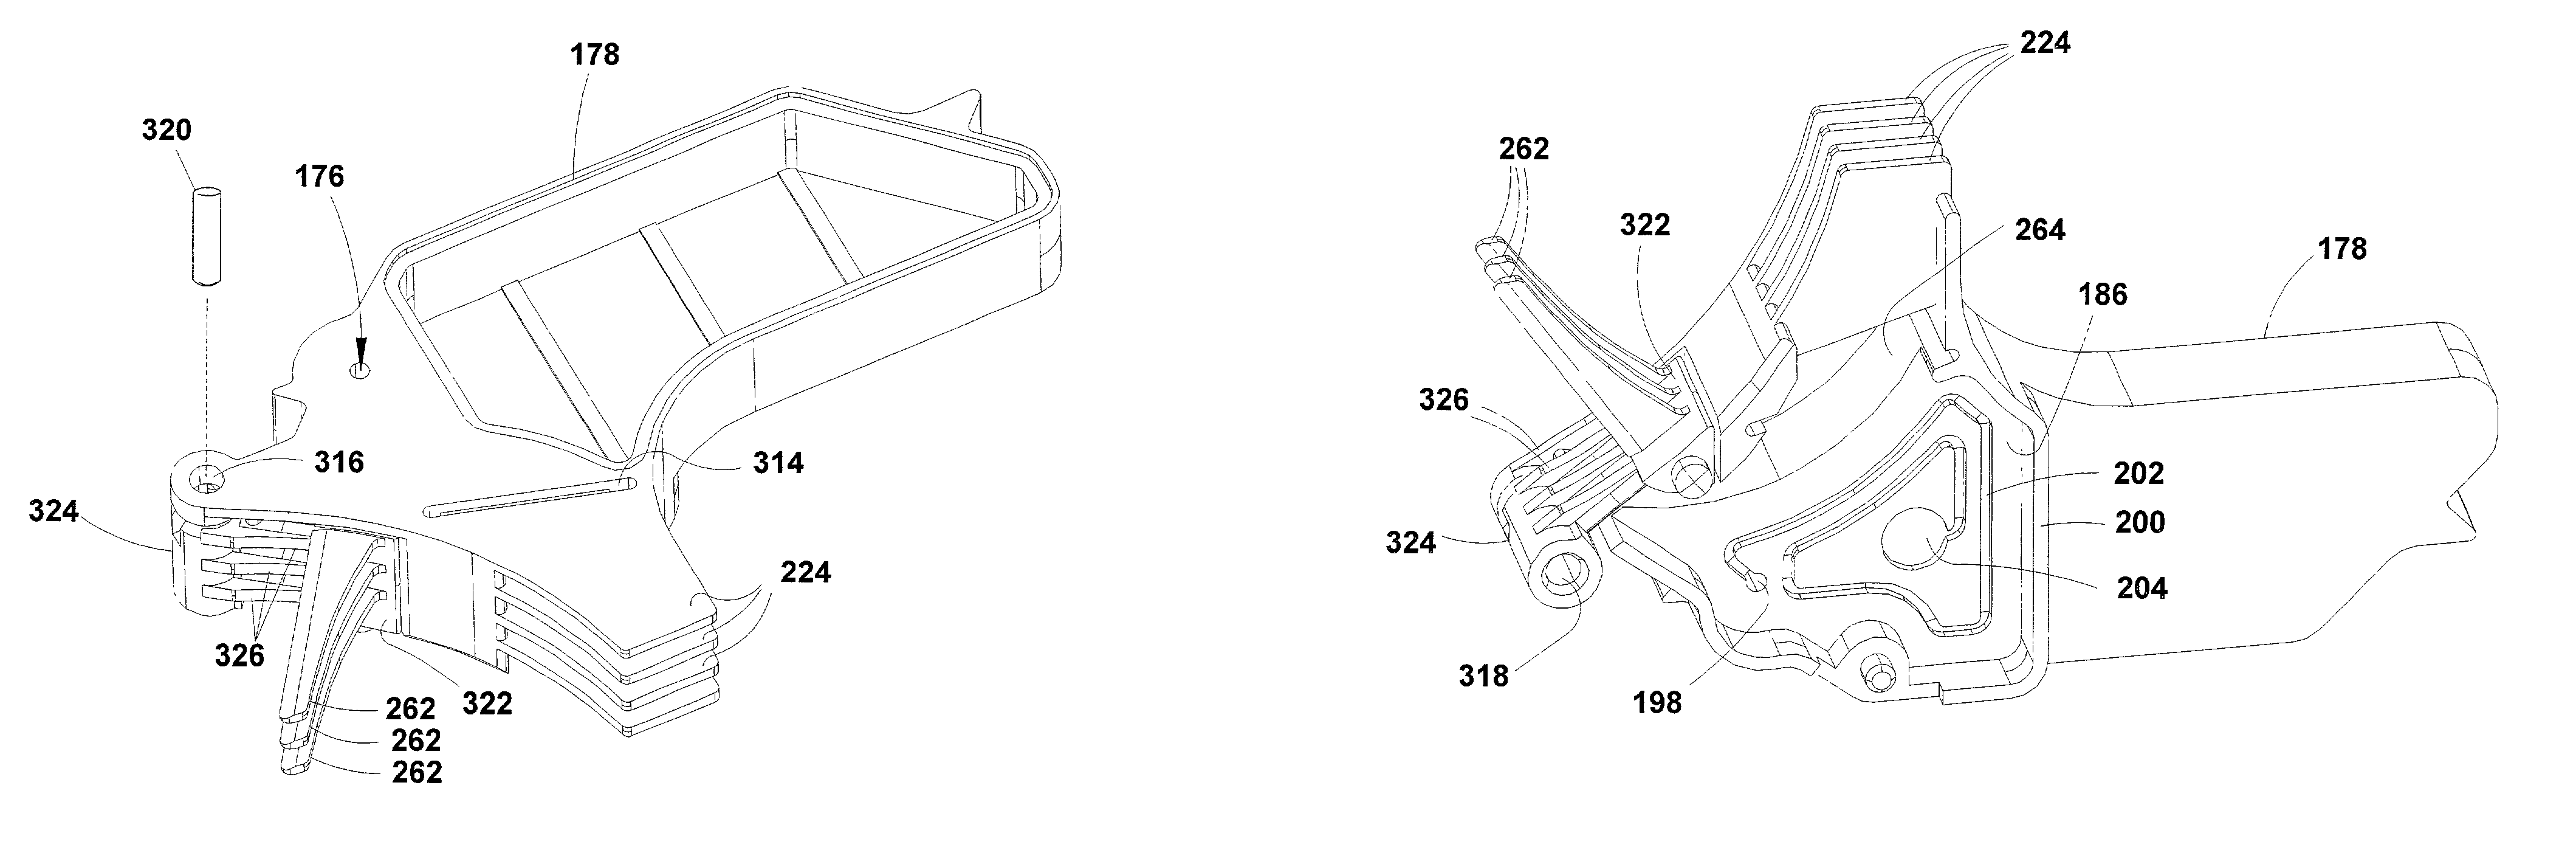 Filter assembly for a data storage device